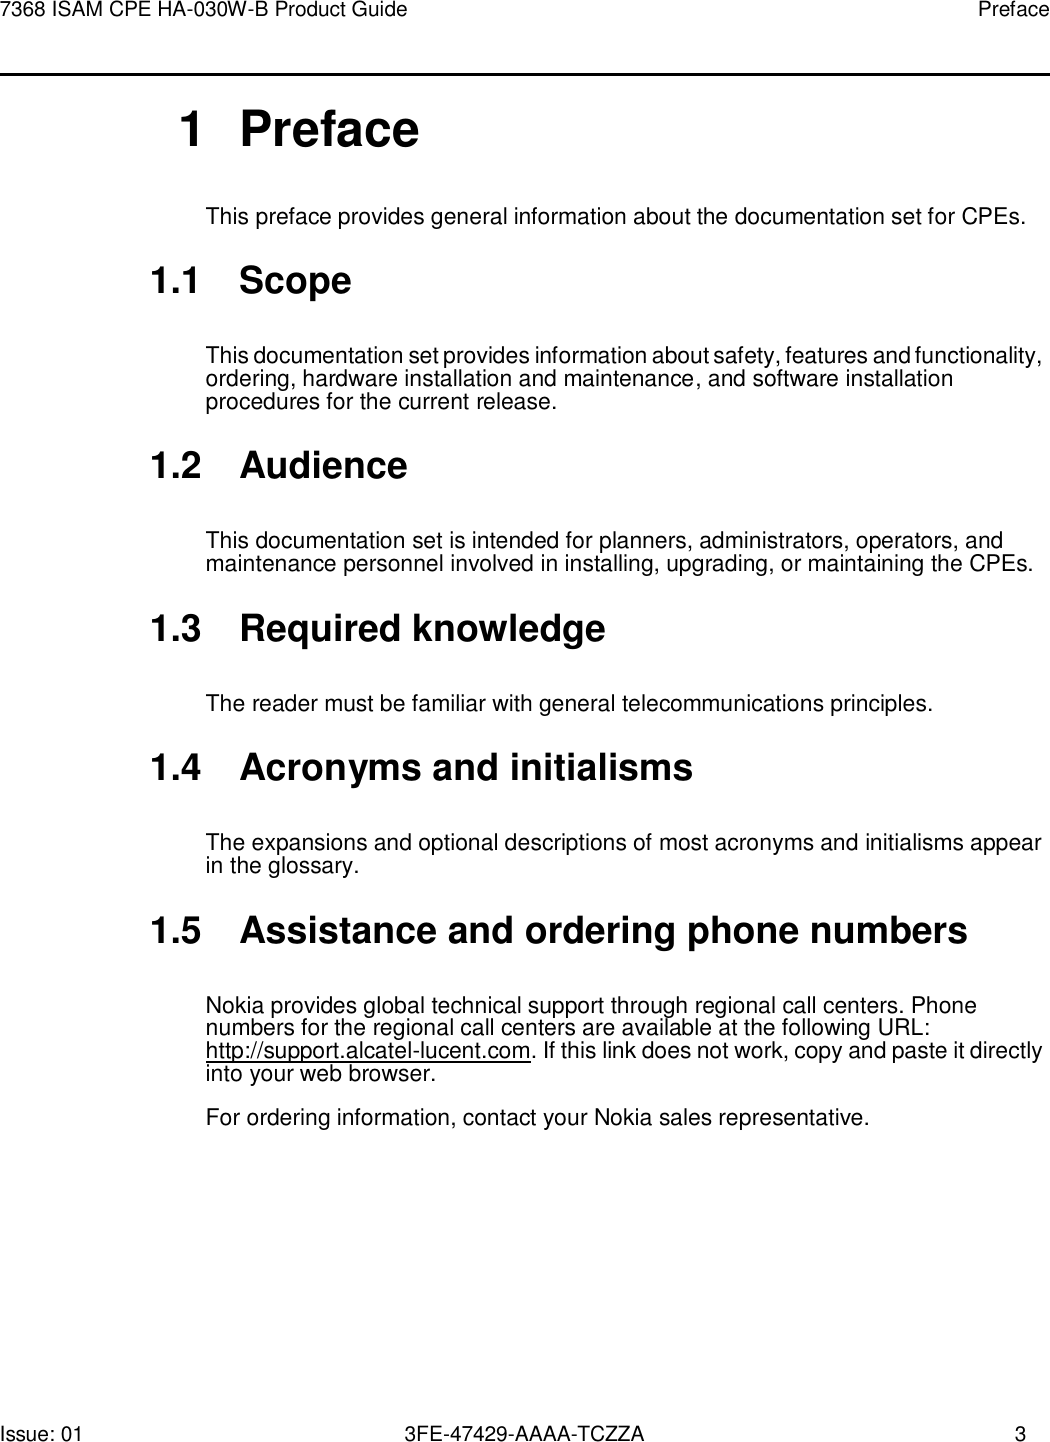 Page 3 of Nokia Bell HA030WB 7368 Intelligent Services Access Manager CPE User Manual 7368 ISAM CPE HA 020W A Product Guide